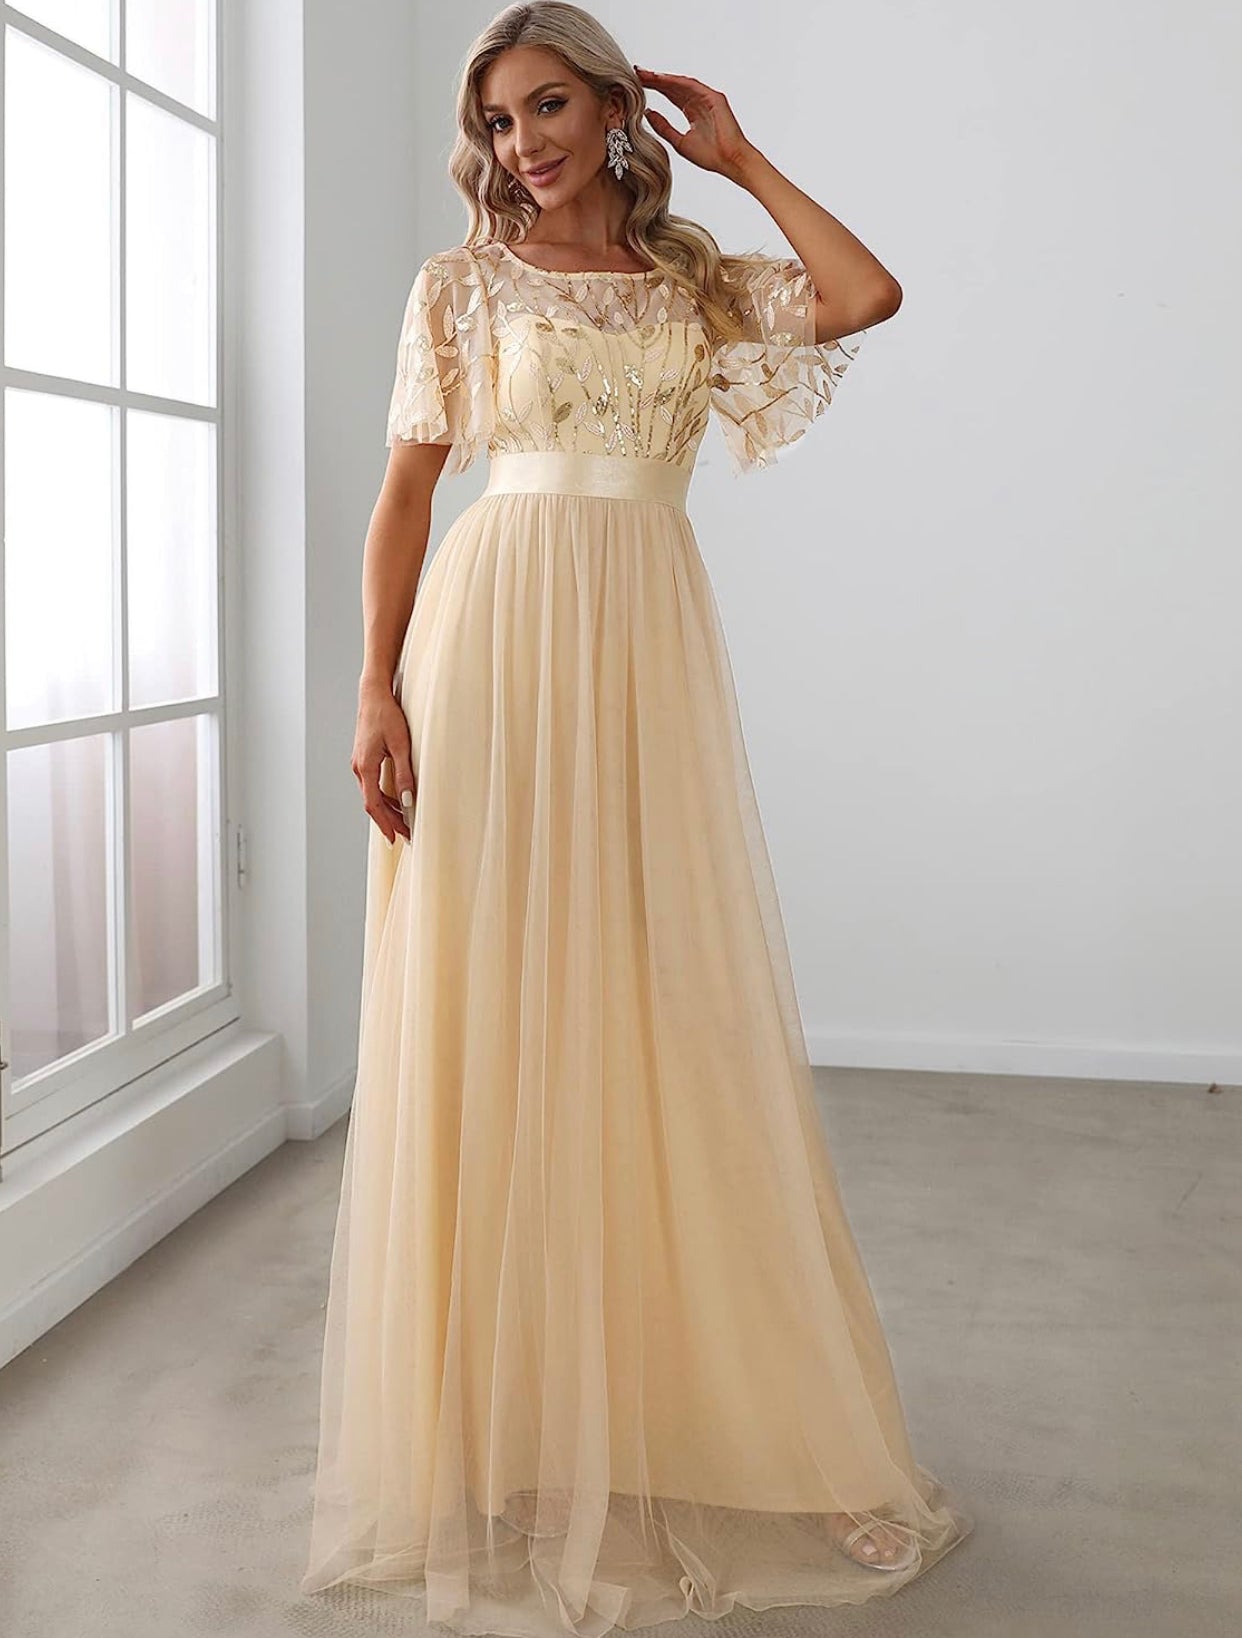 Empire Waist Embroidery Formal Dress (US Sizes 4 - 26) Champagne